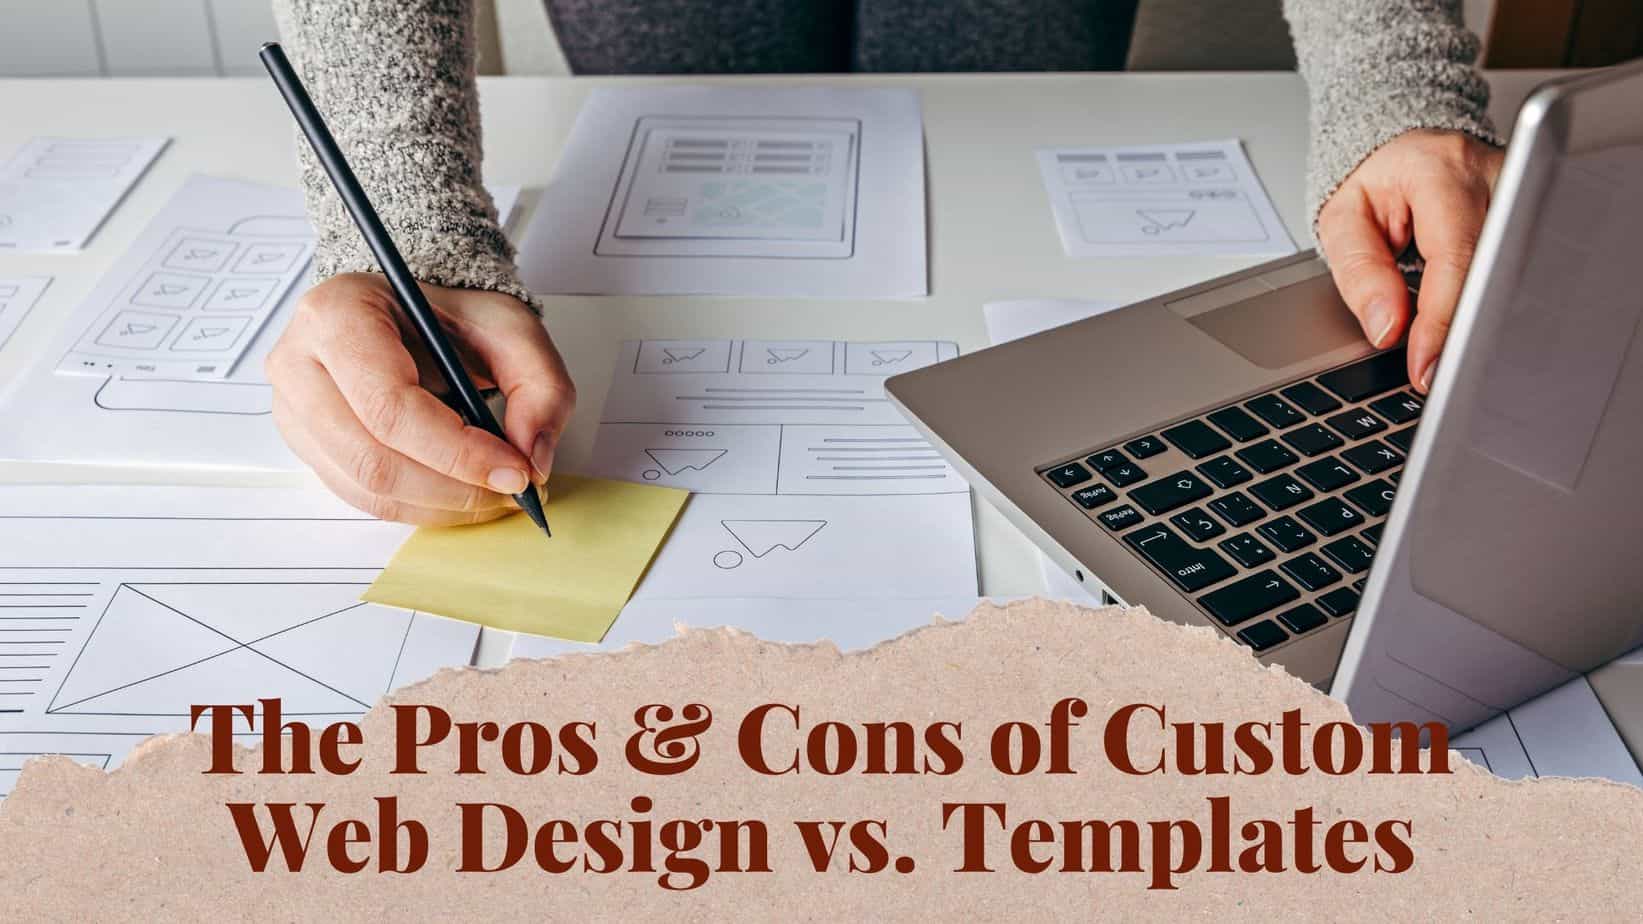 Featured image for “The Pros & Cons of Custom Web Design vs. Templates”